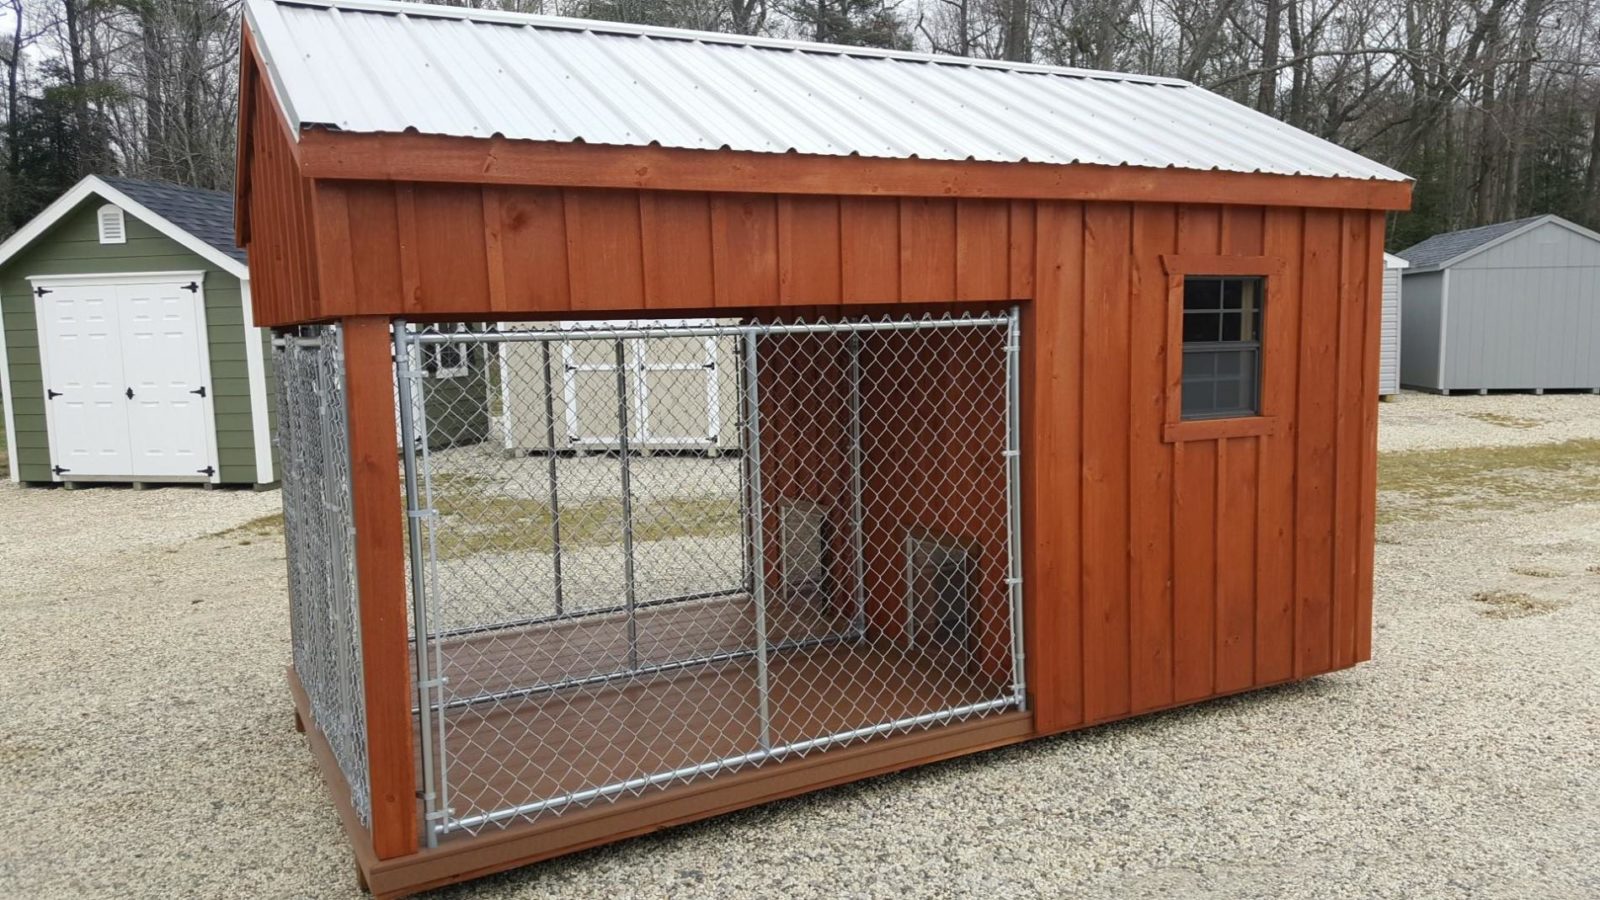 Photos of Dog Kennels that we’ve Sold in Pocomoke, MD.